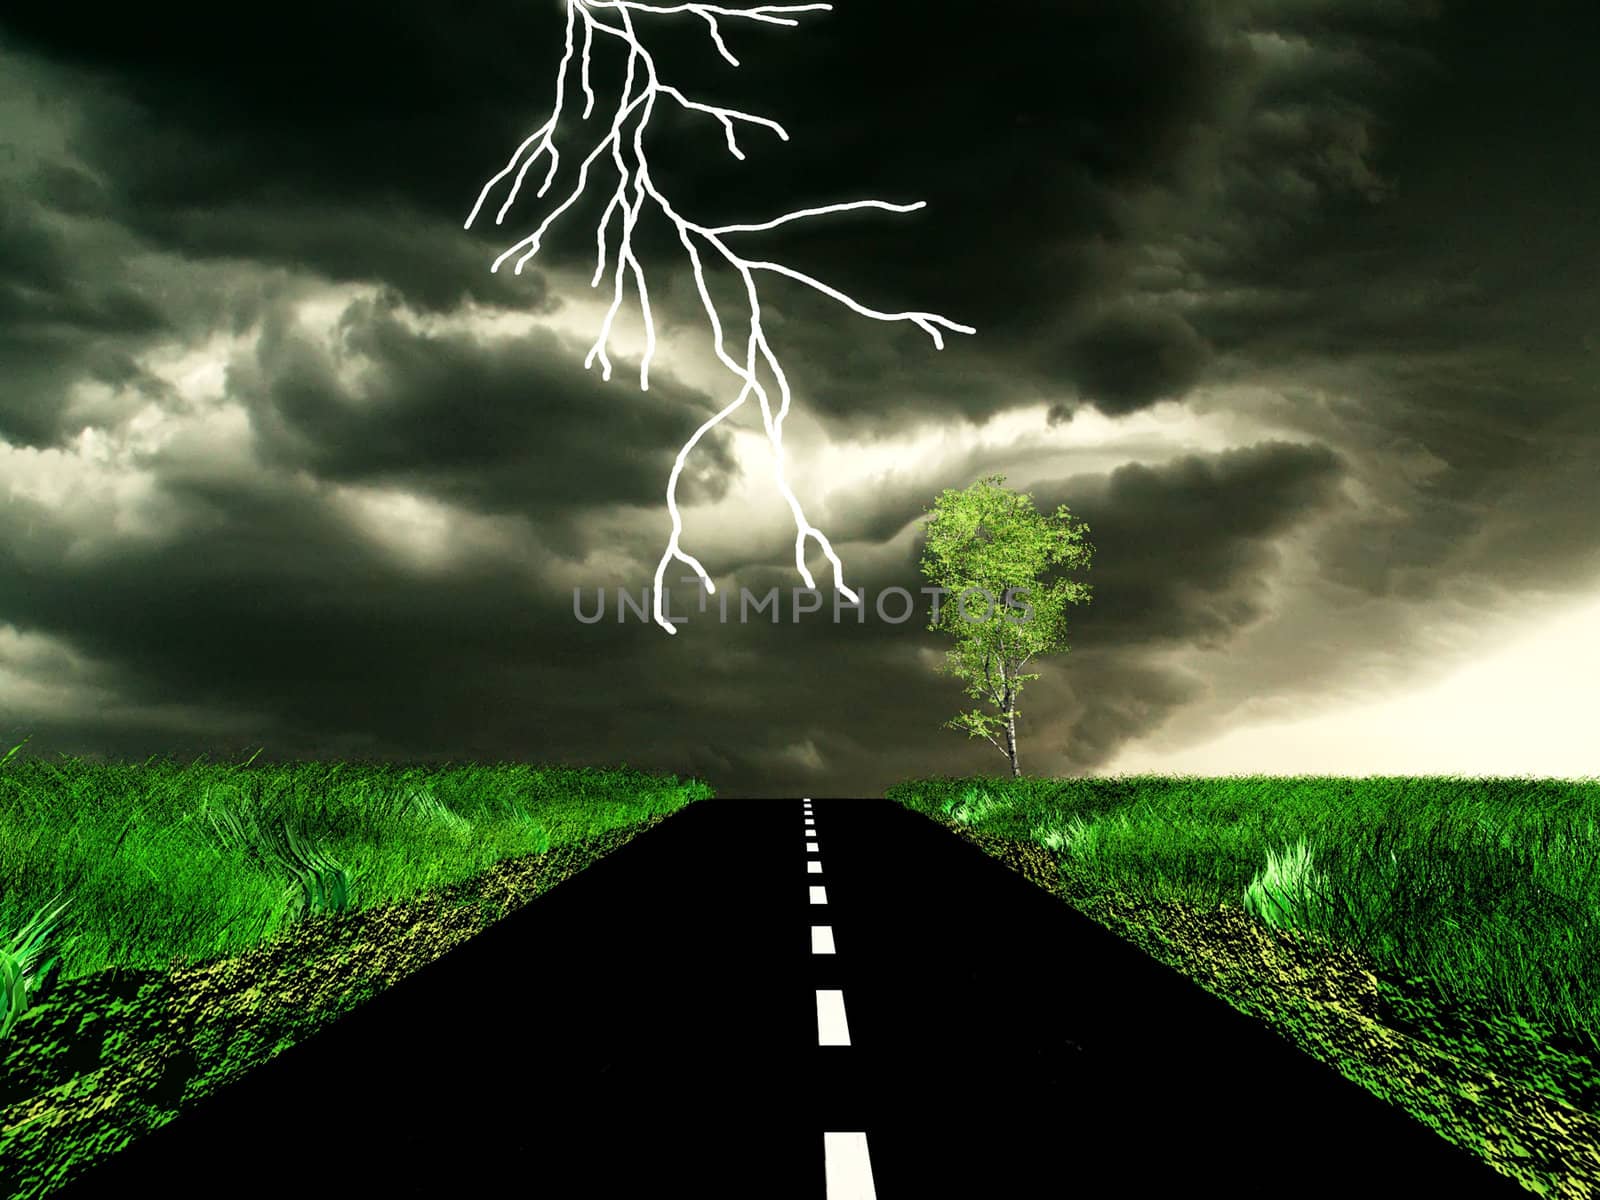 storm on the road by njaj